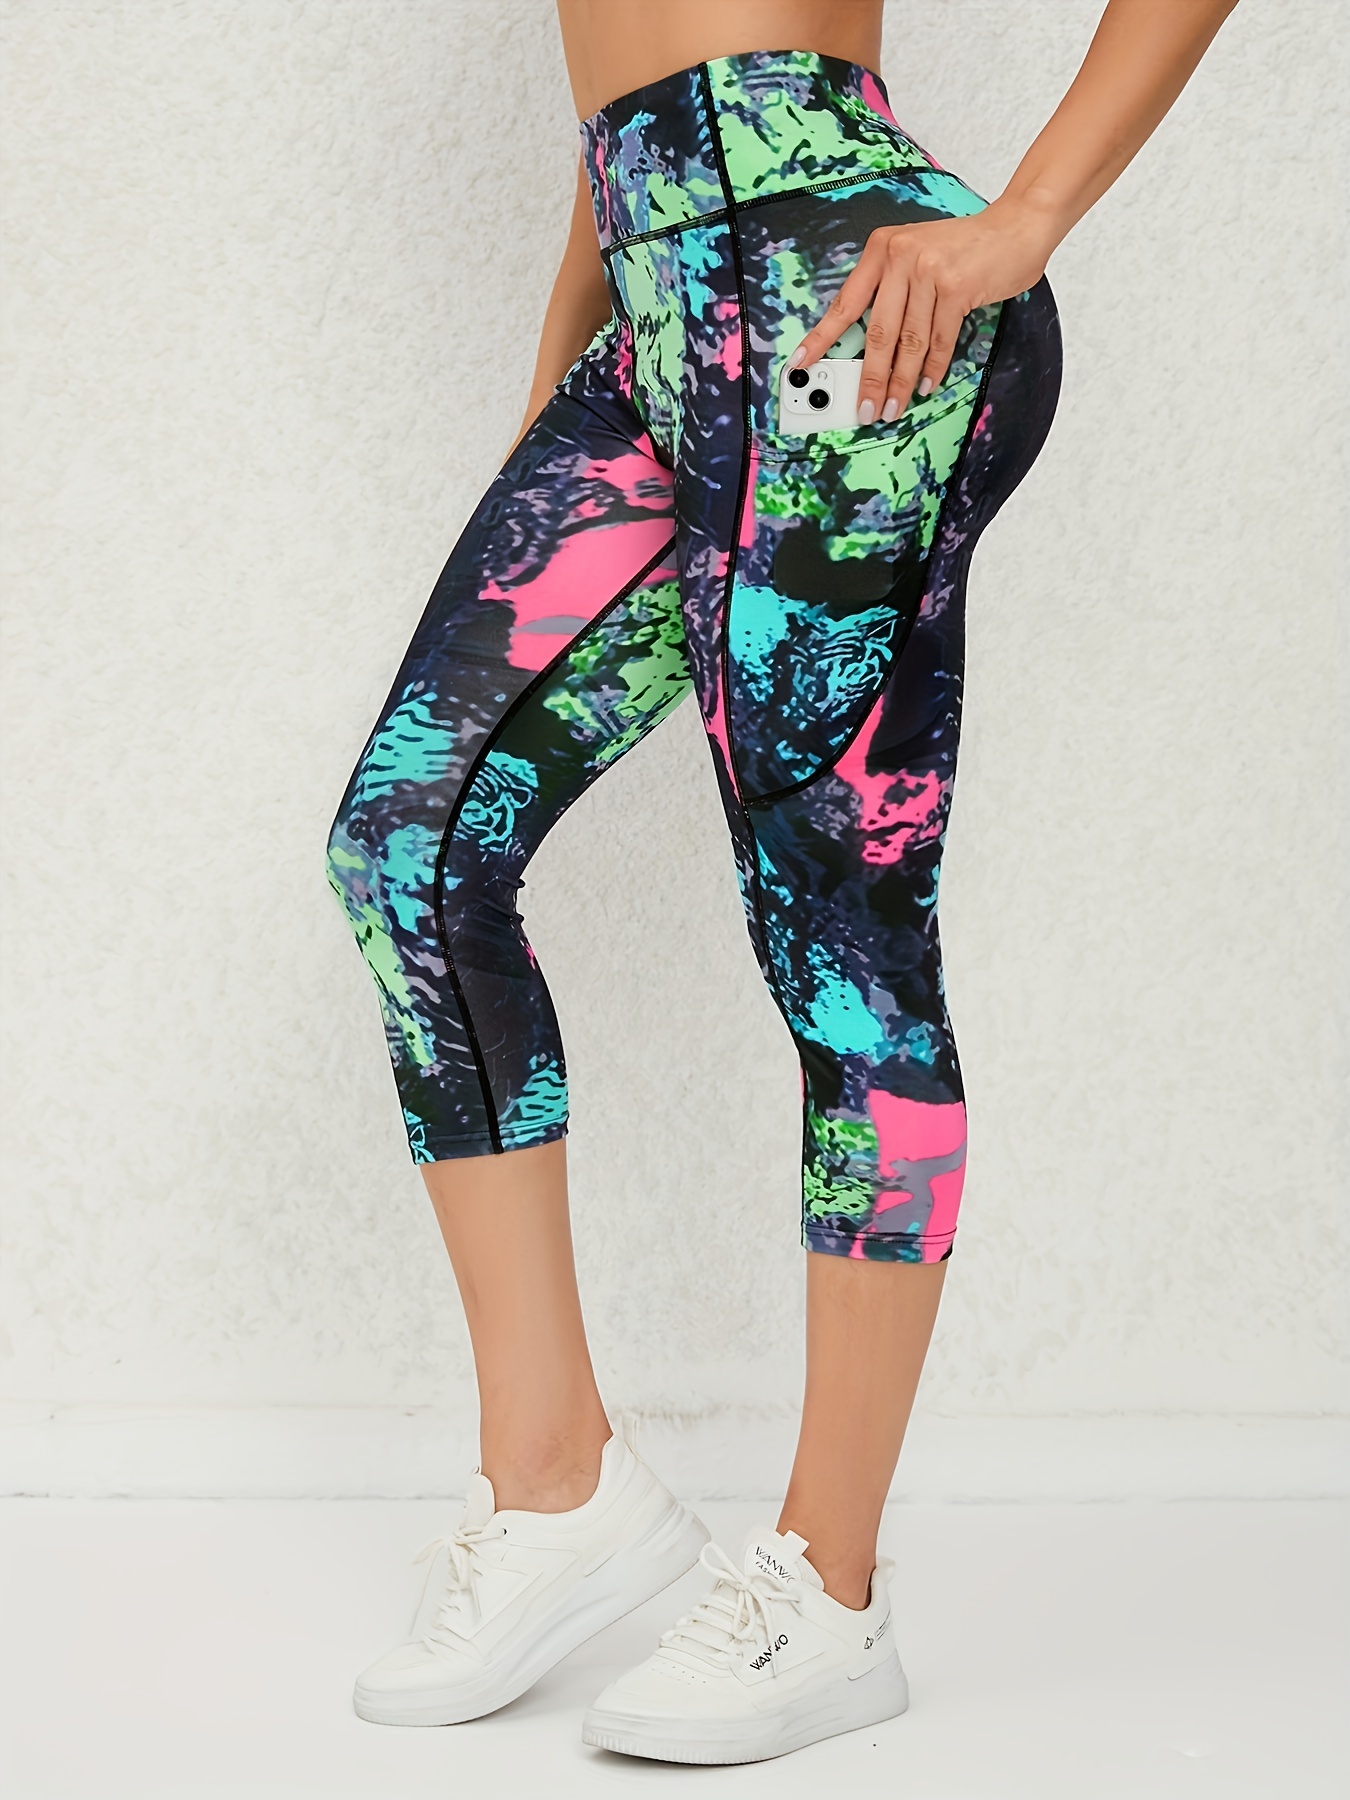 Women Gym Legging With Pockets - Floral Print